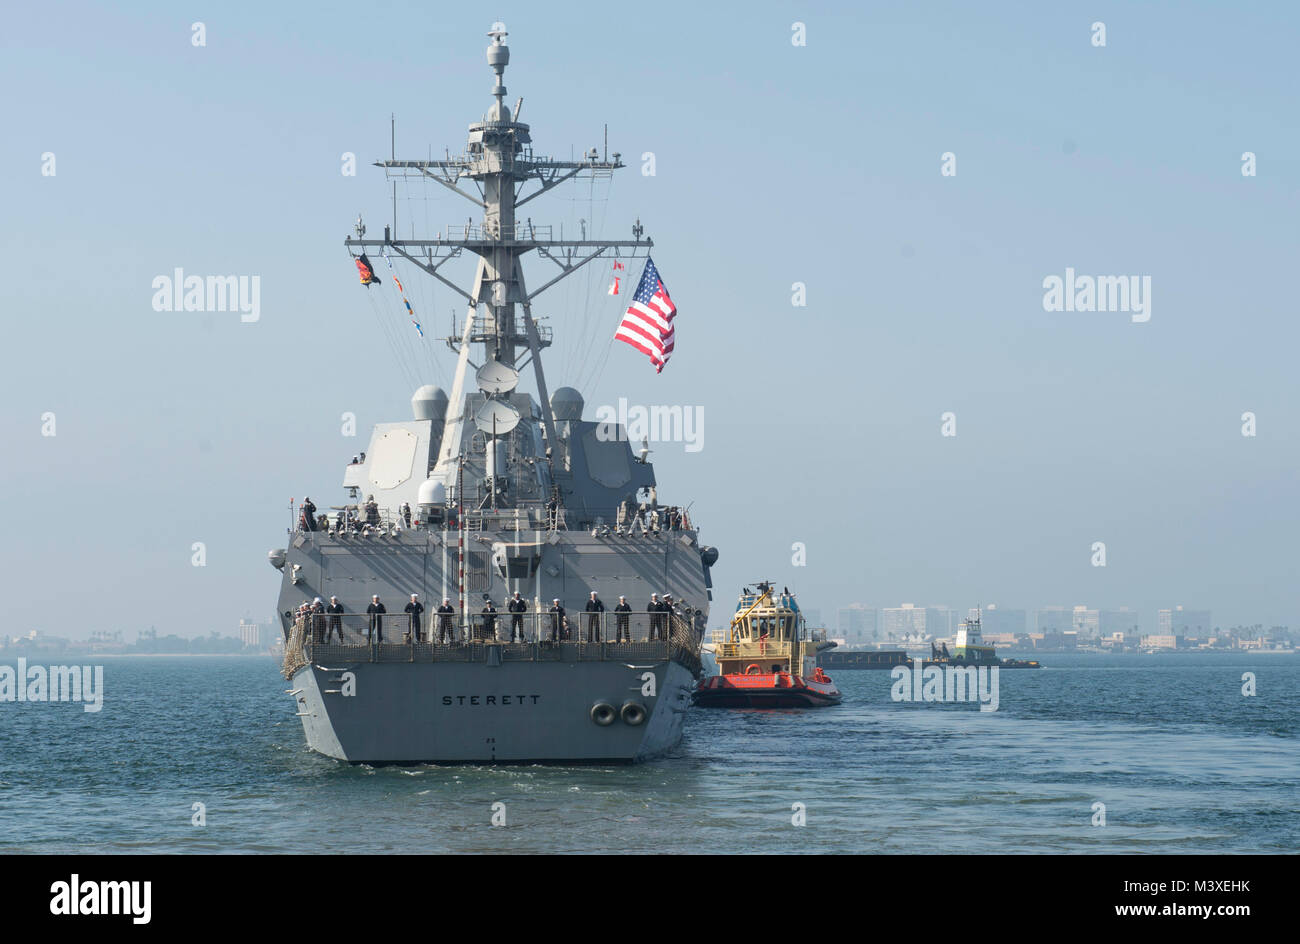 180206-N-HS117-0002  (SAN DIEGO) Arleigh Burke-class guided-missile destroyer USS Sterett (DDG104), along with USS Dewey (DDG 105), departed Naval Base San Diego for a scheduled deployment to conduct operations in the Indo-Pacific Region, Feb. 6. Dewey and Sterett will also support the Wasp Expeditionary Strike Group deployment in order to advance U.S. Pacific Fleet's Up-Gunned ESG concept and will train with forward-deployed amphibious ships across all mission areas. (U.S. Navy video by Mass Communication Specialist Seaman Apprentice Jeffery L. Southerland/RELEASED) Stock Photo